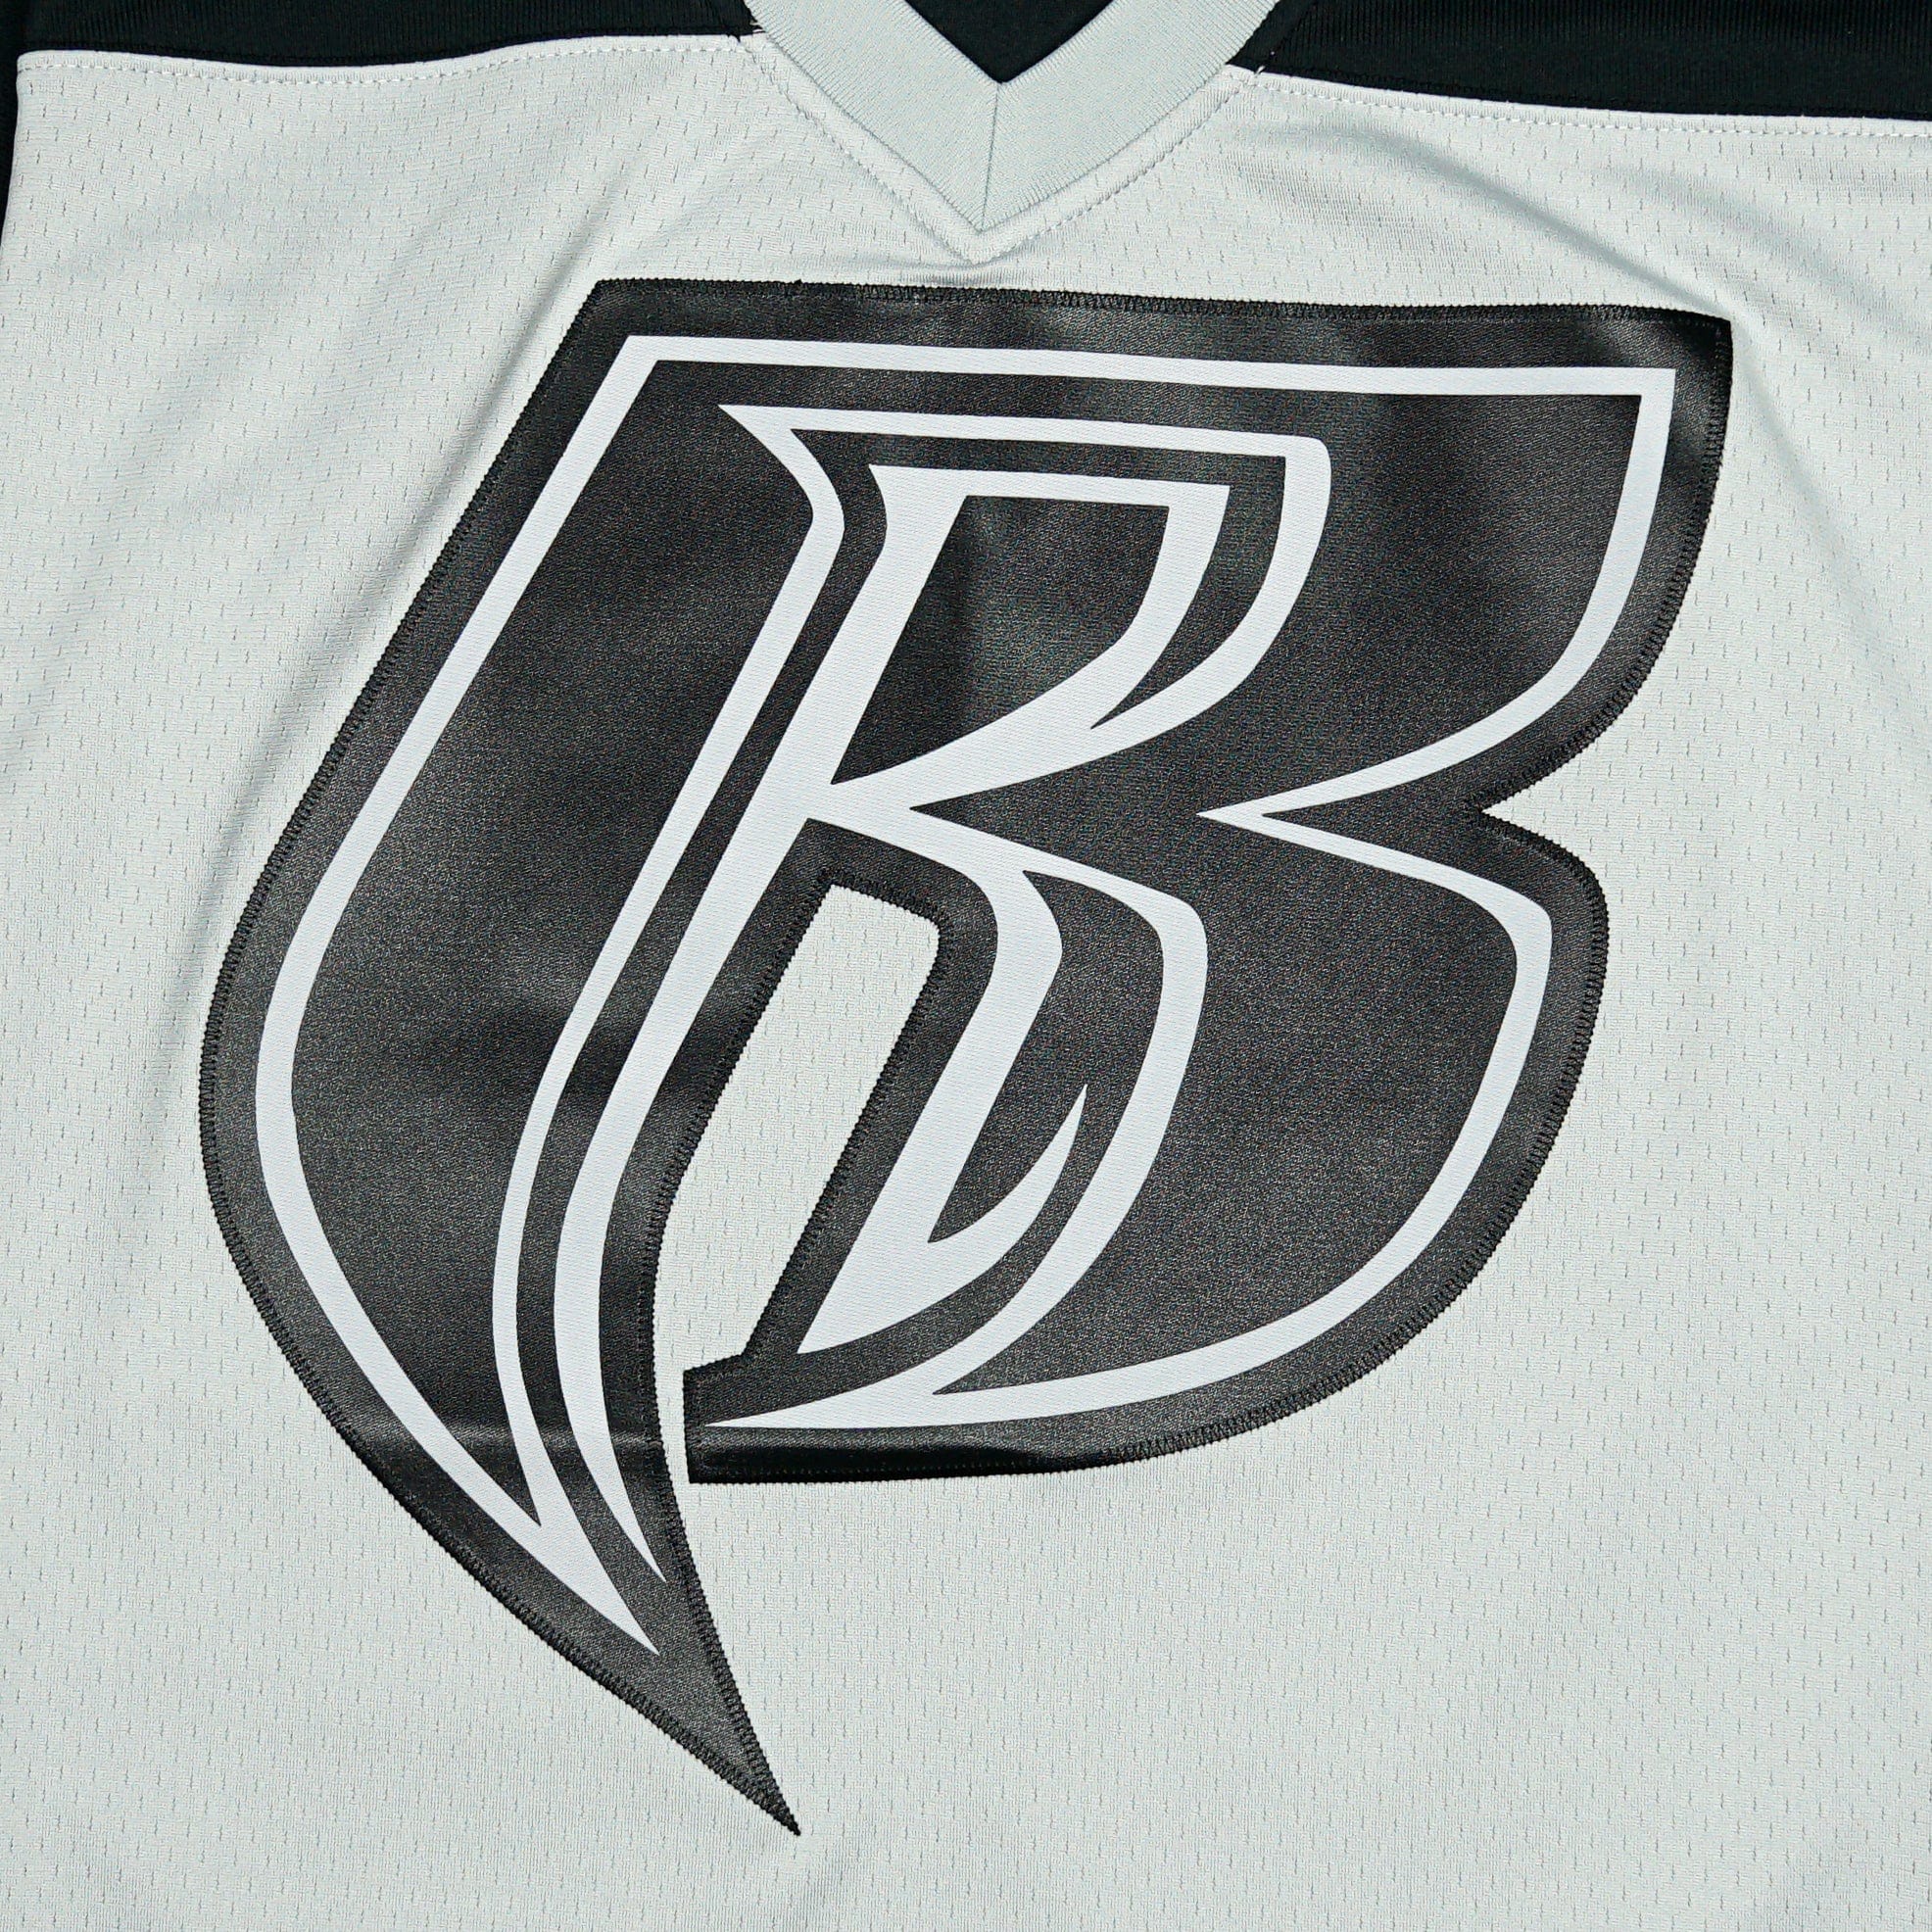 50th Anniversary of Hip Hop Ruff Ryders Football Jersey in silver and black